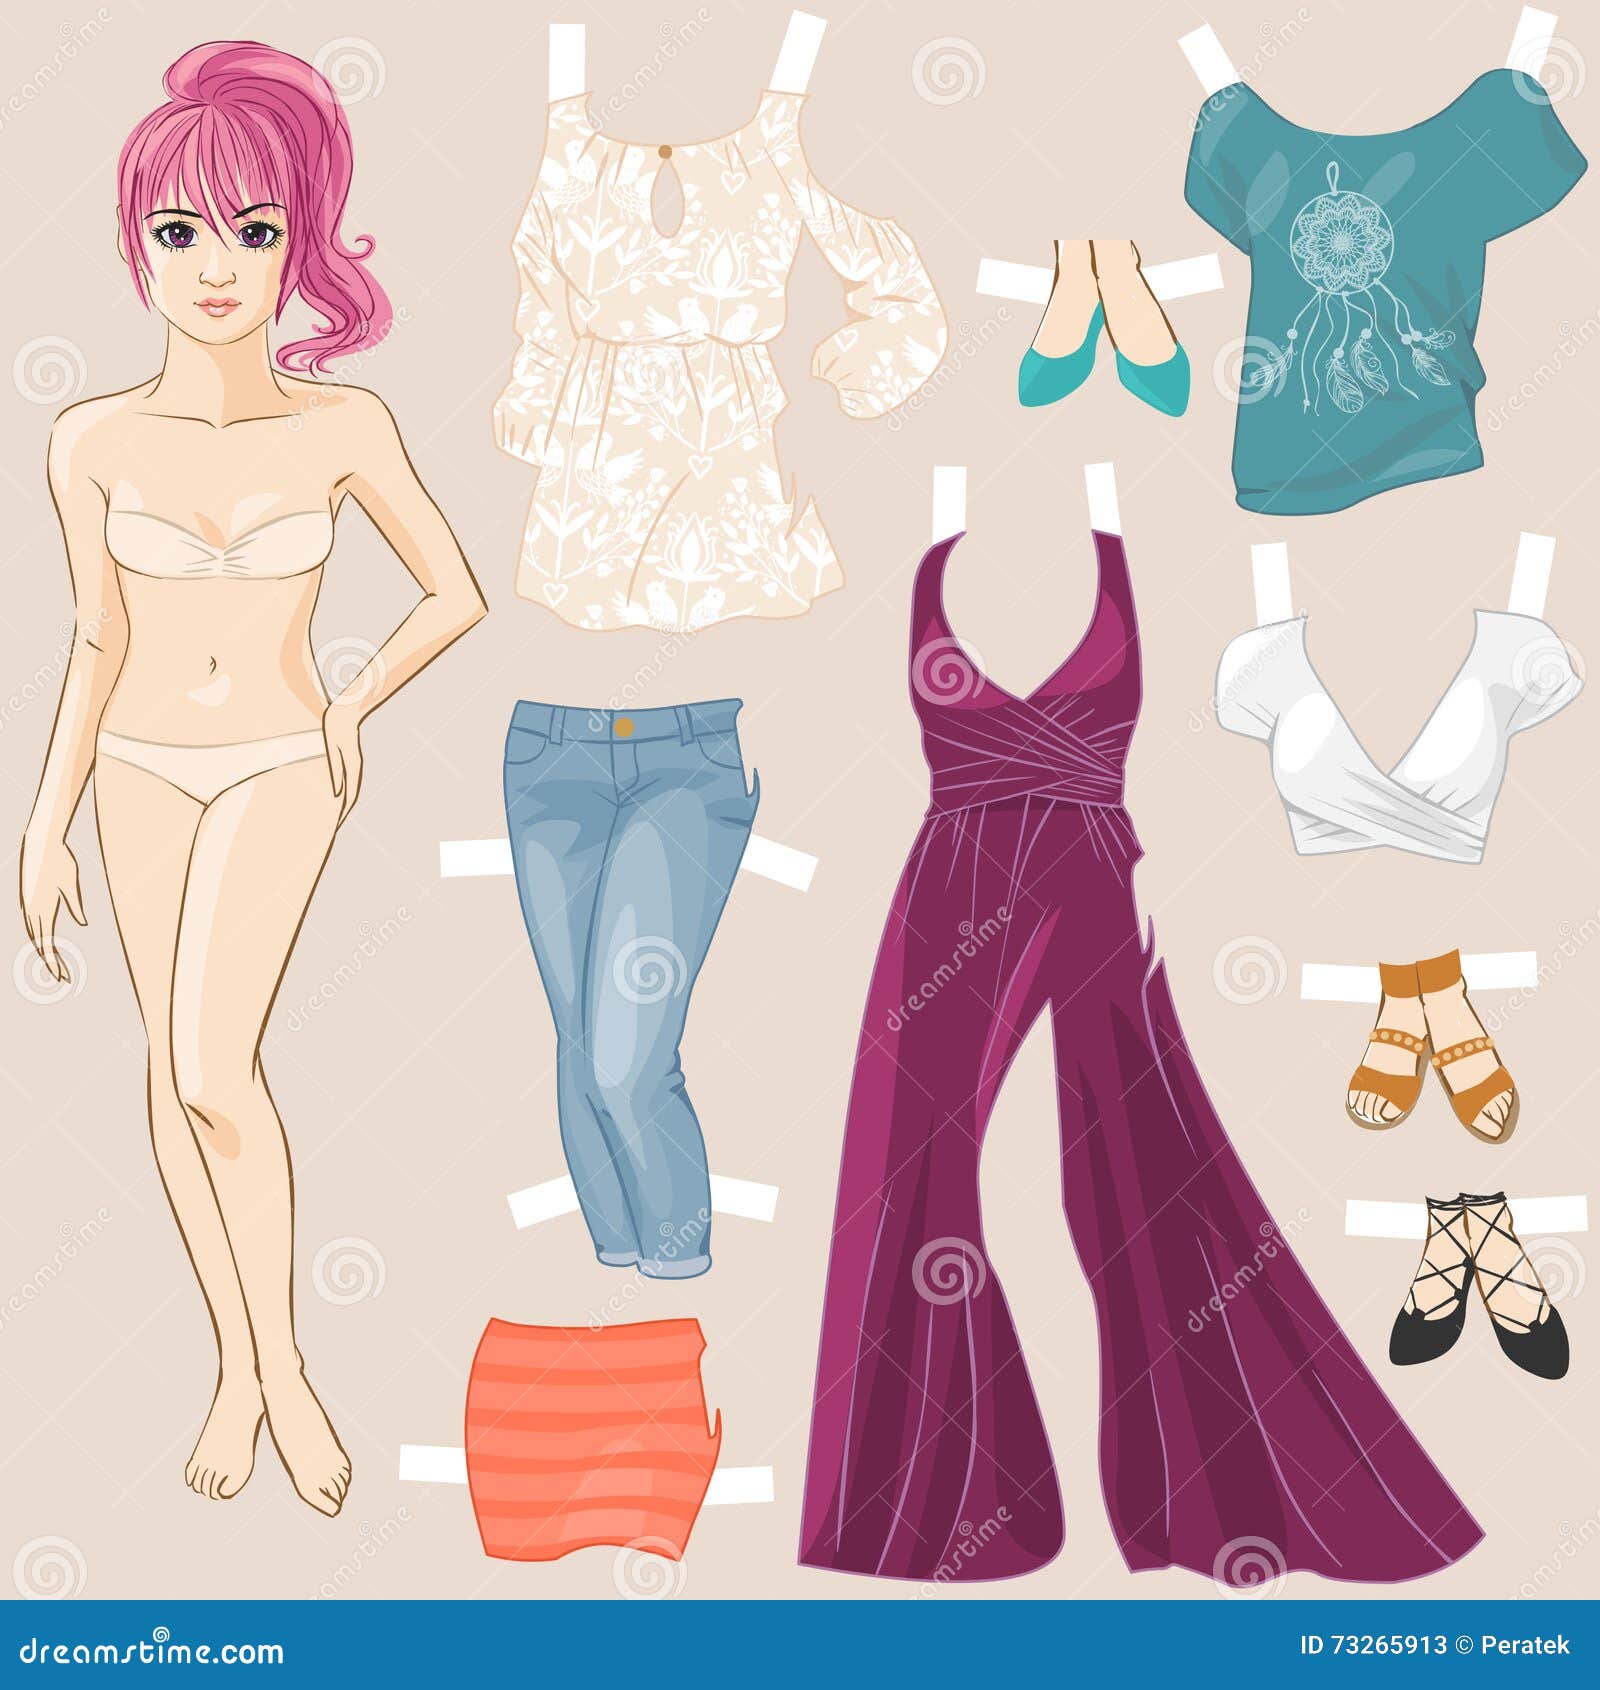 500 Anime paper doll ideas  anime paper paper dolls paper dolls printable